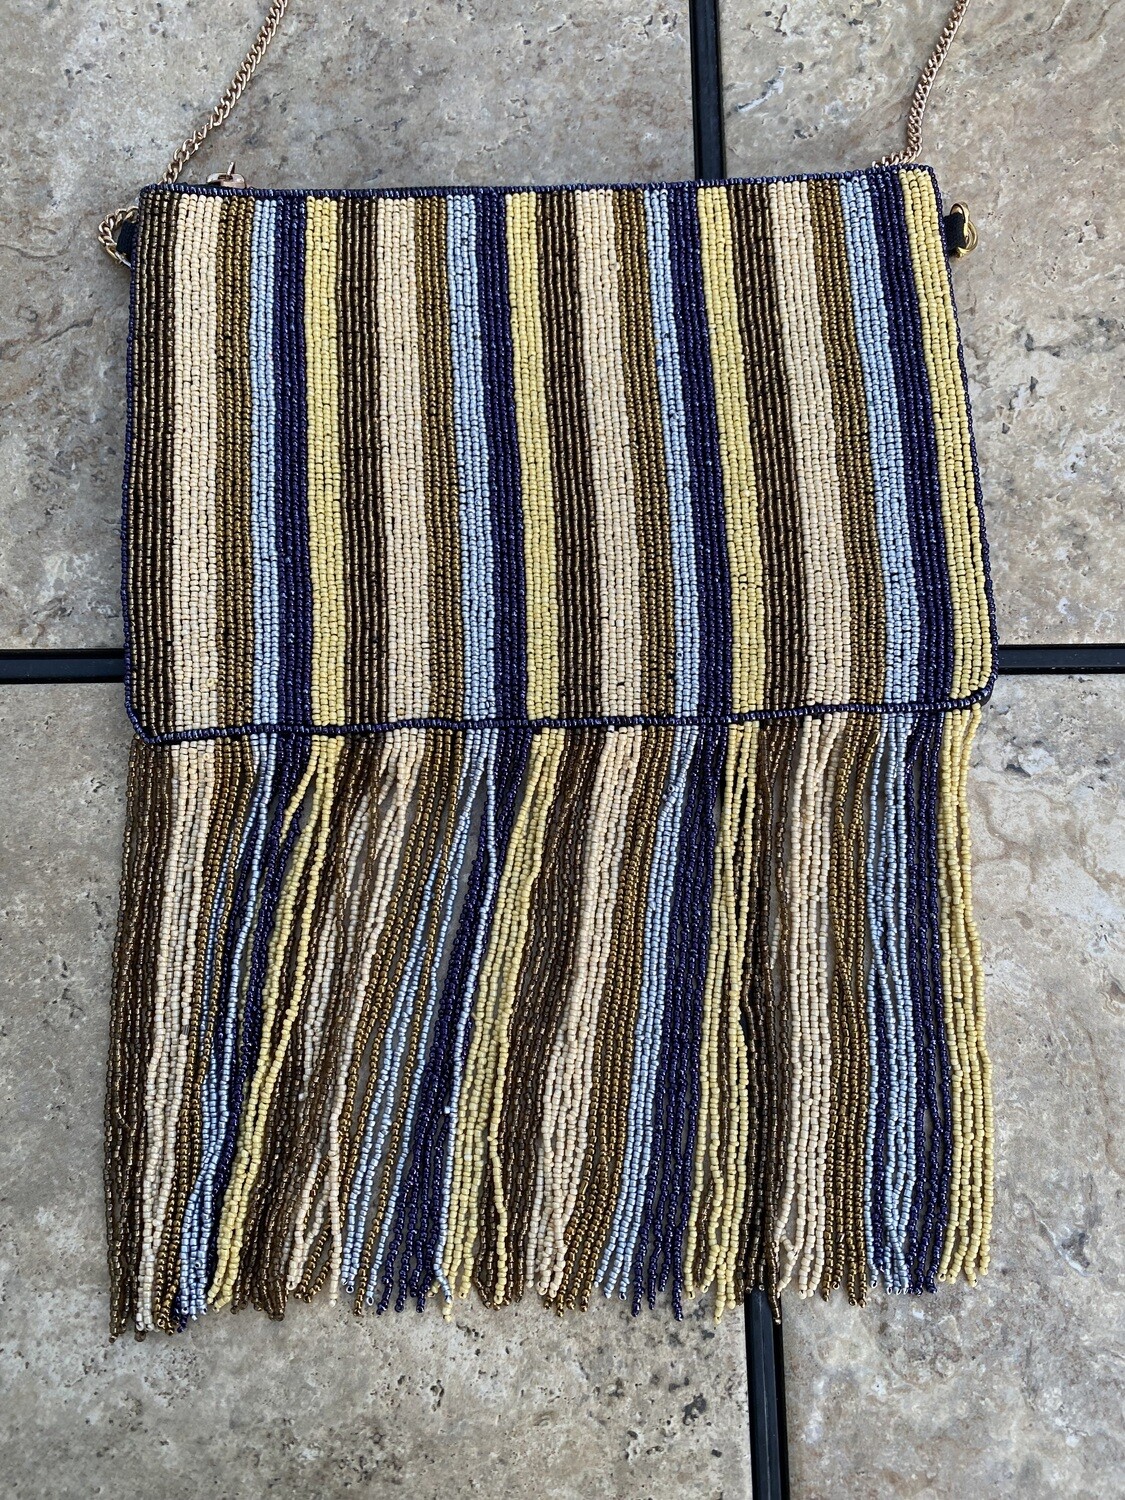 Fringe Striped Color Blocked Seed Beaded Clutch Bag | Trendy Accessories | Luxury Handbags | Sorority Gifts | Evening Bags